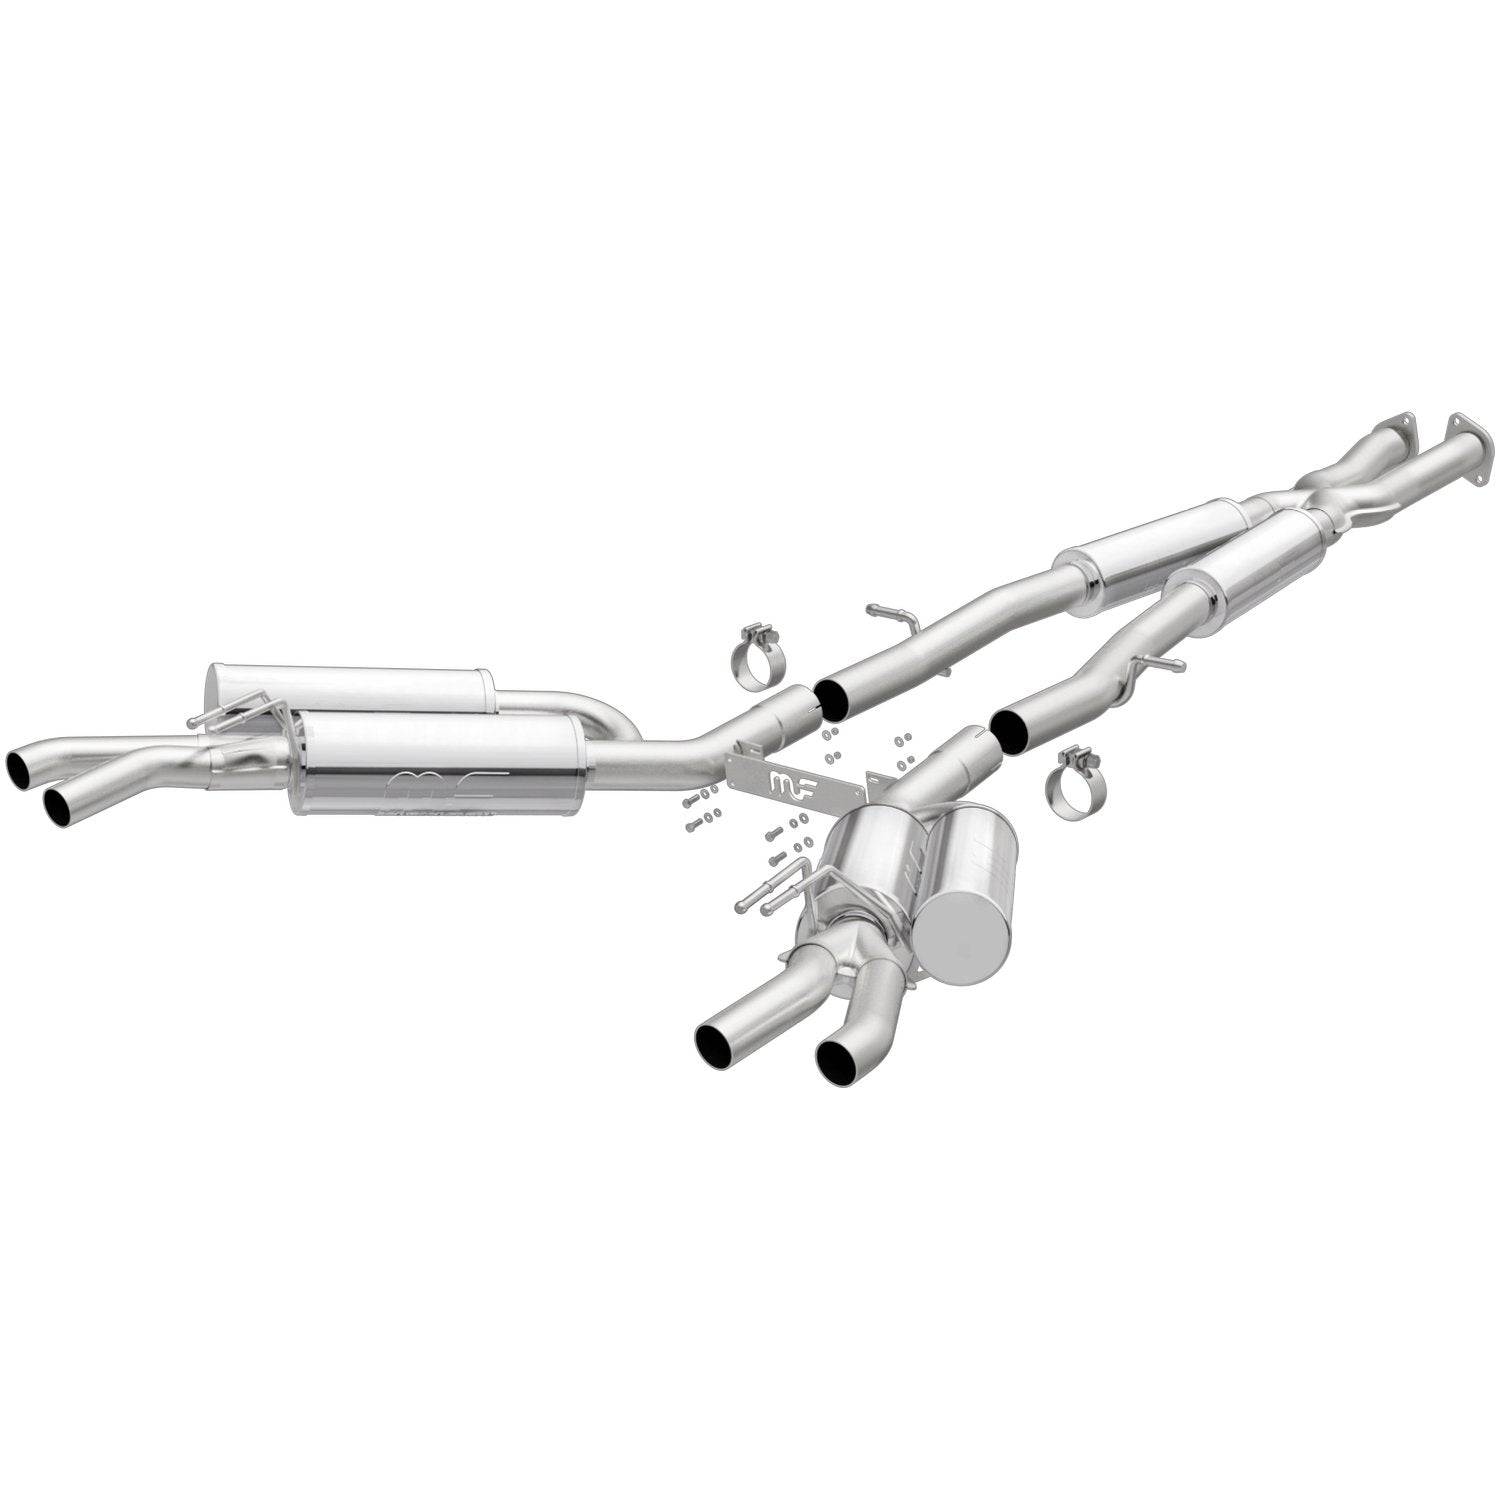 Magnaflow 'Competition' Series Cat-Back Exhaust for Kia Stinger 3.3L V6 2017-21 | #19406 - Available from NEMESISUK.COM